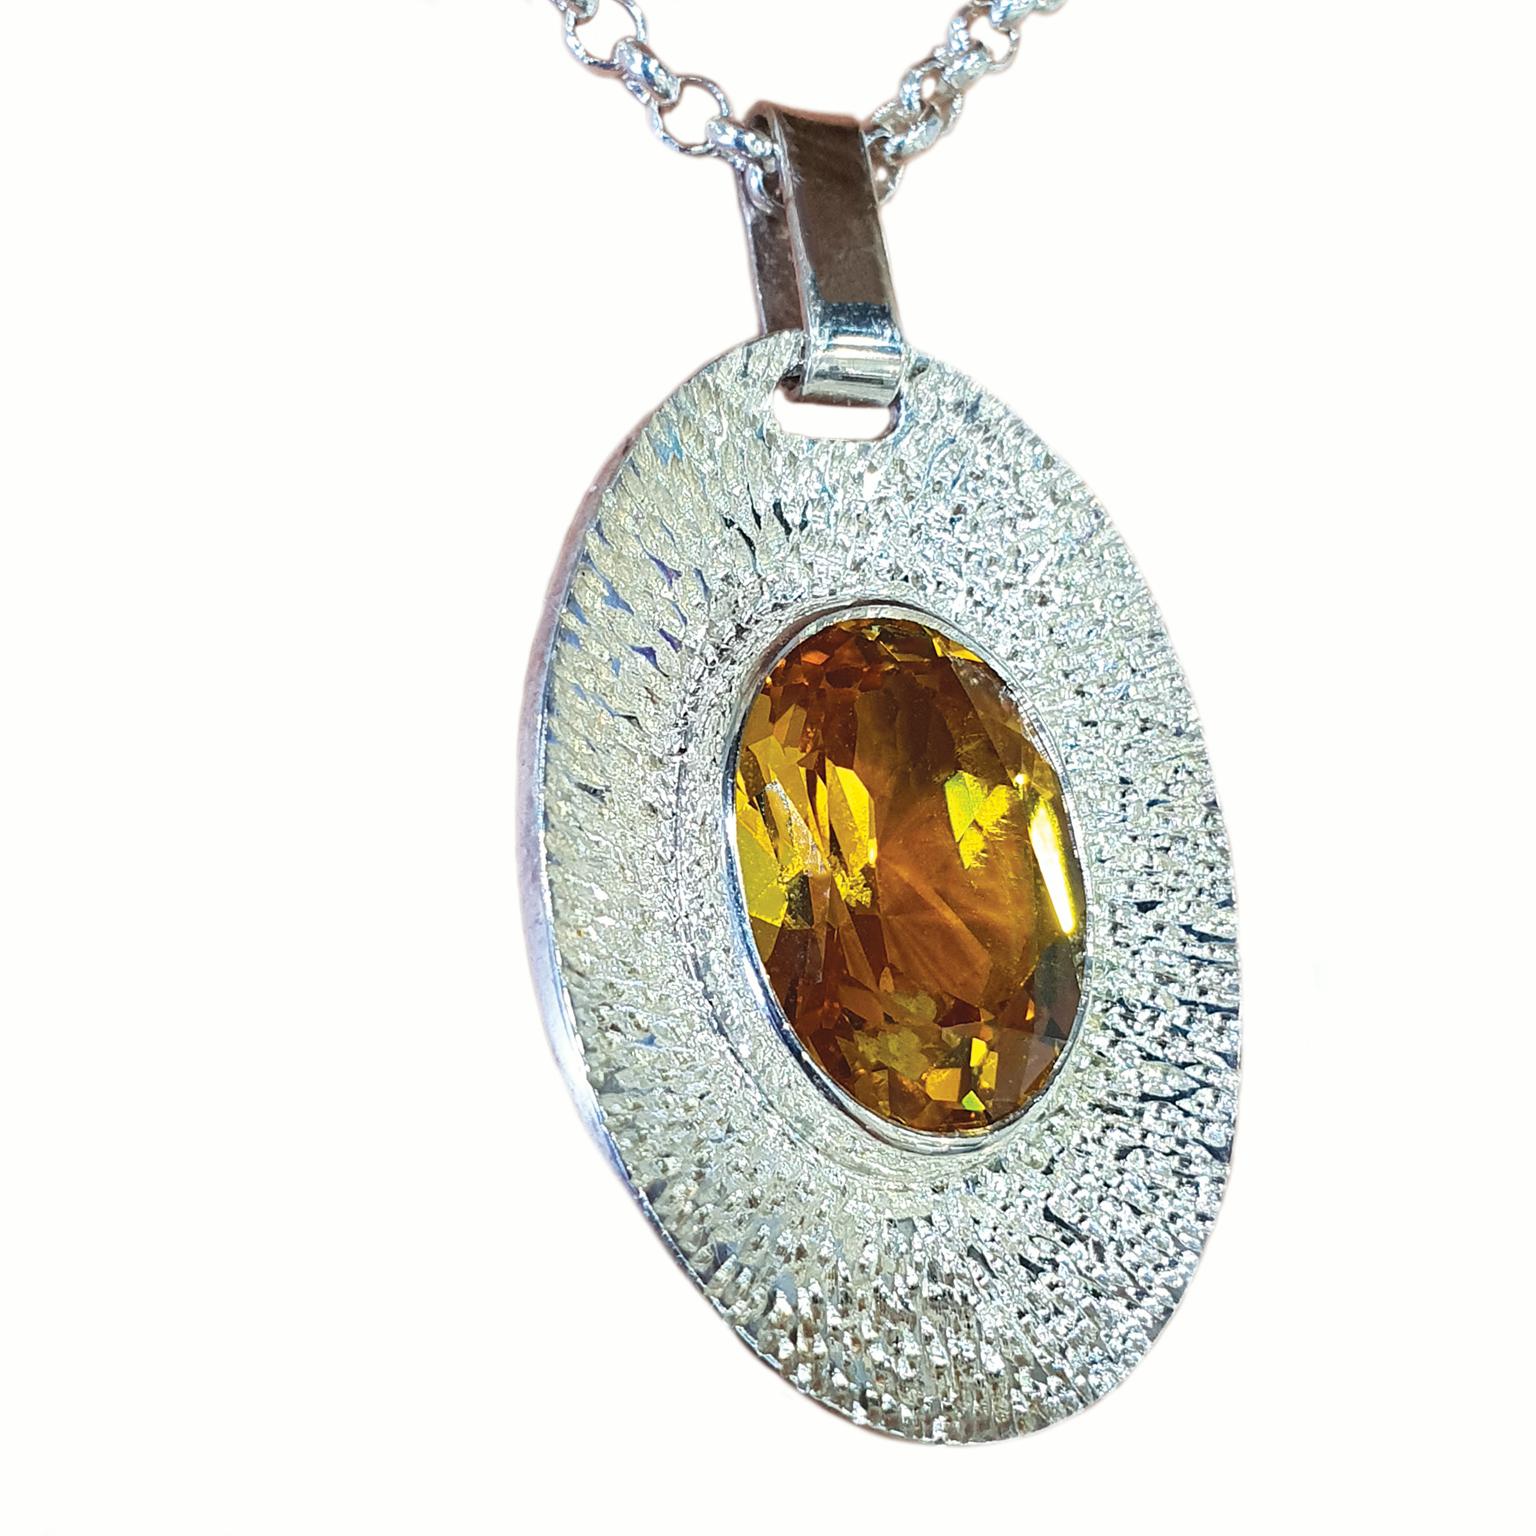 Paul Amey’s yellow oval pendant was crafted from tarnish resistant Sterling Silver. The pendant features a golden yellow synthetic corundum stone surrounded by a textured background. The pendant weighs 6.2 grams and measures 27mm by 19mm.

The